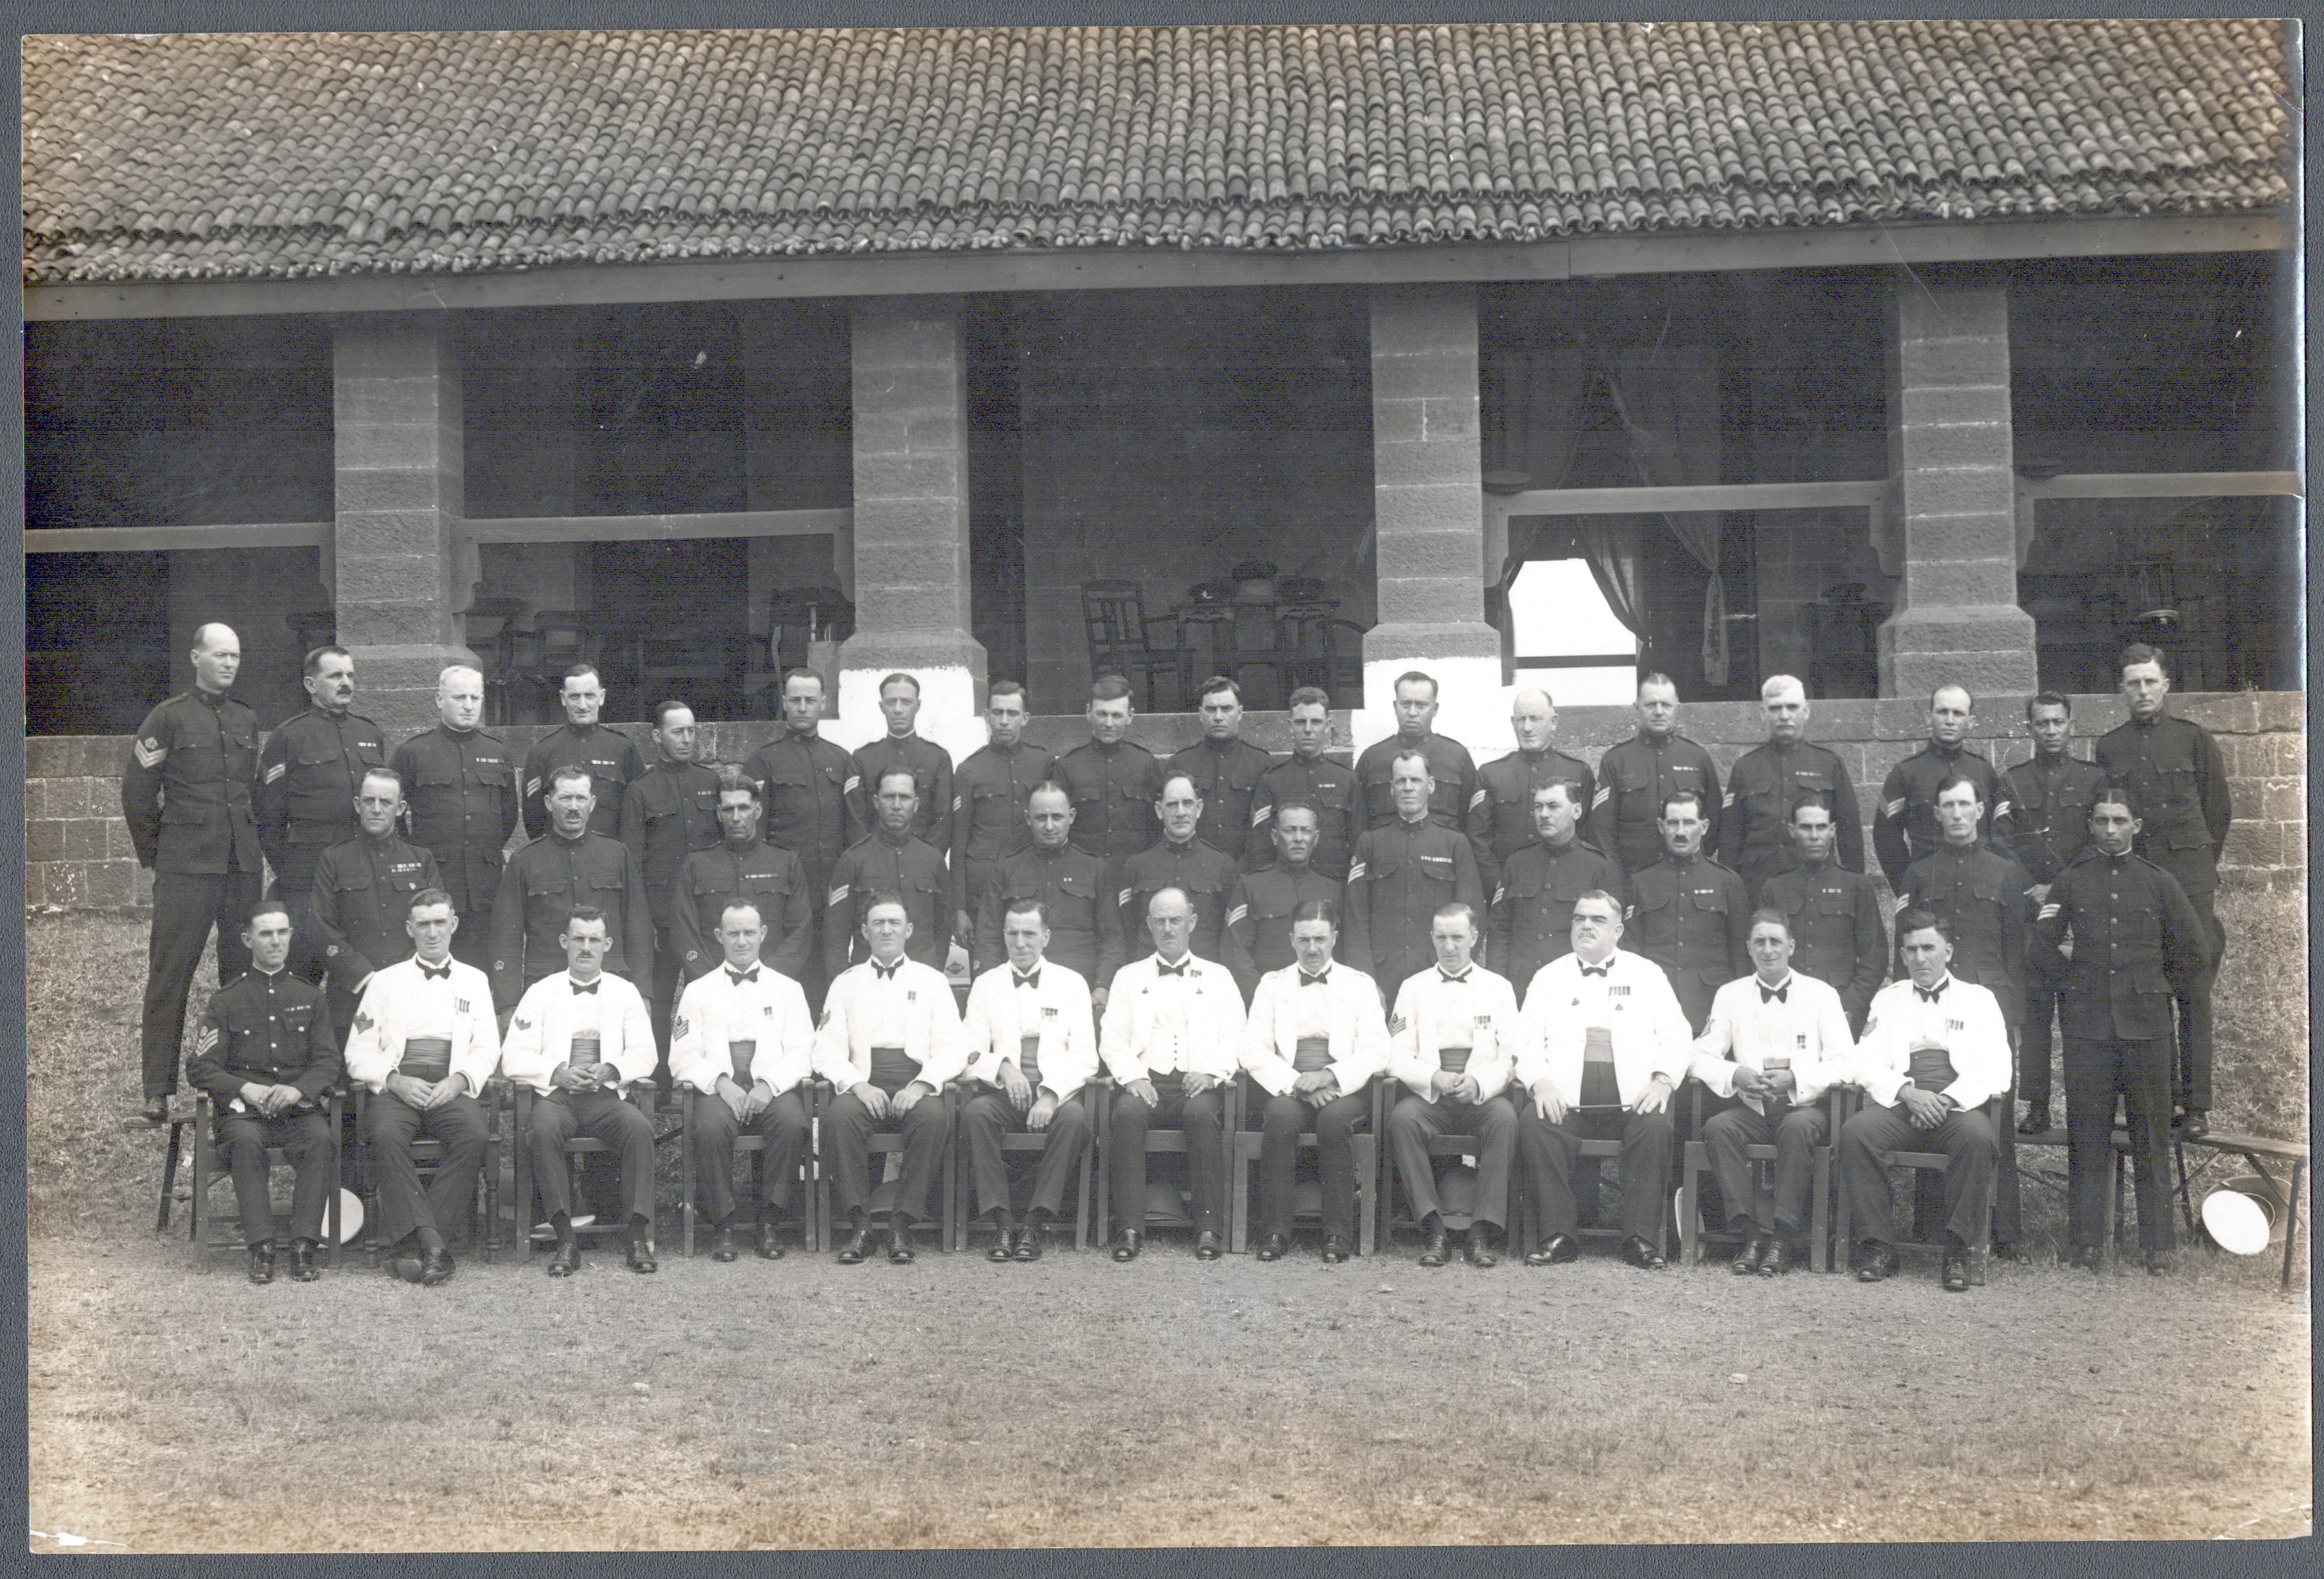 VINTAGE PHOTOGRAPH SHOWING BRITISH MILITARY PERSONNEL